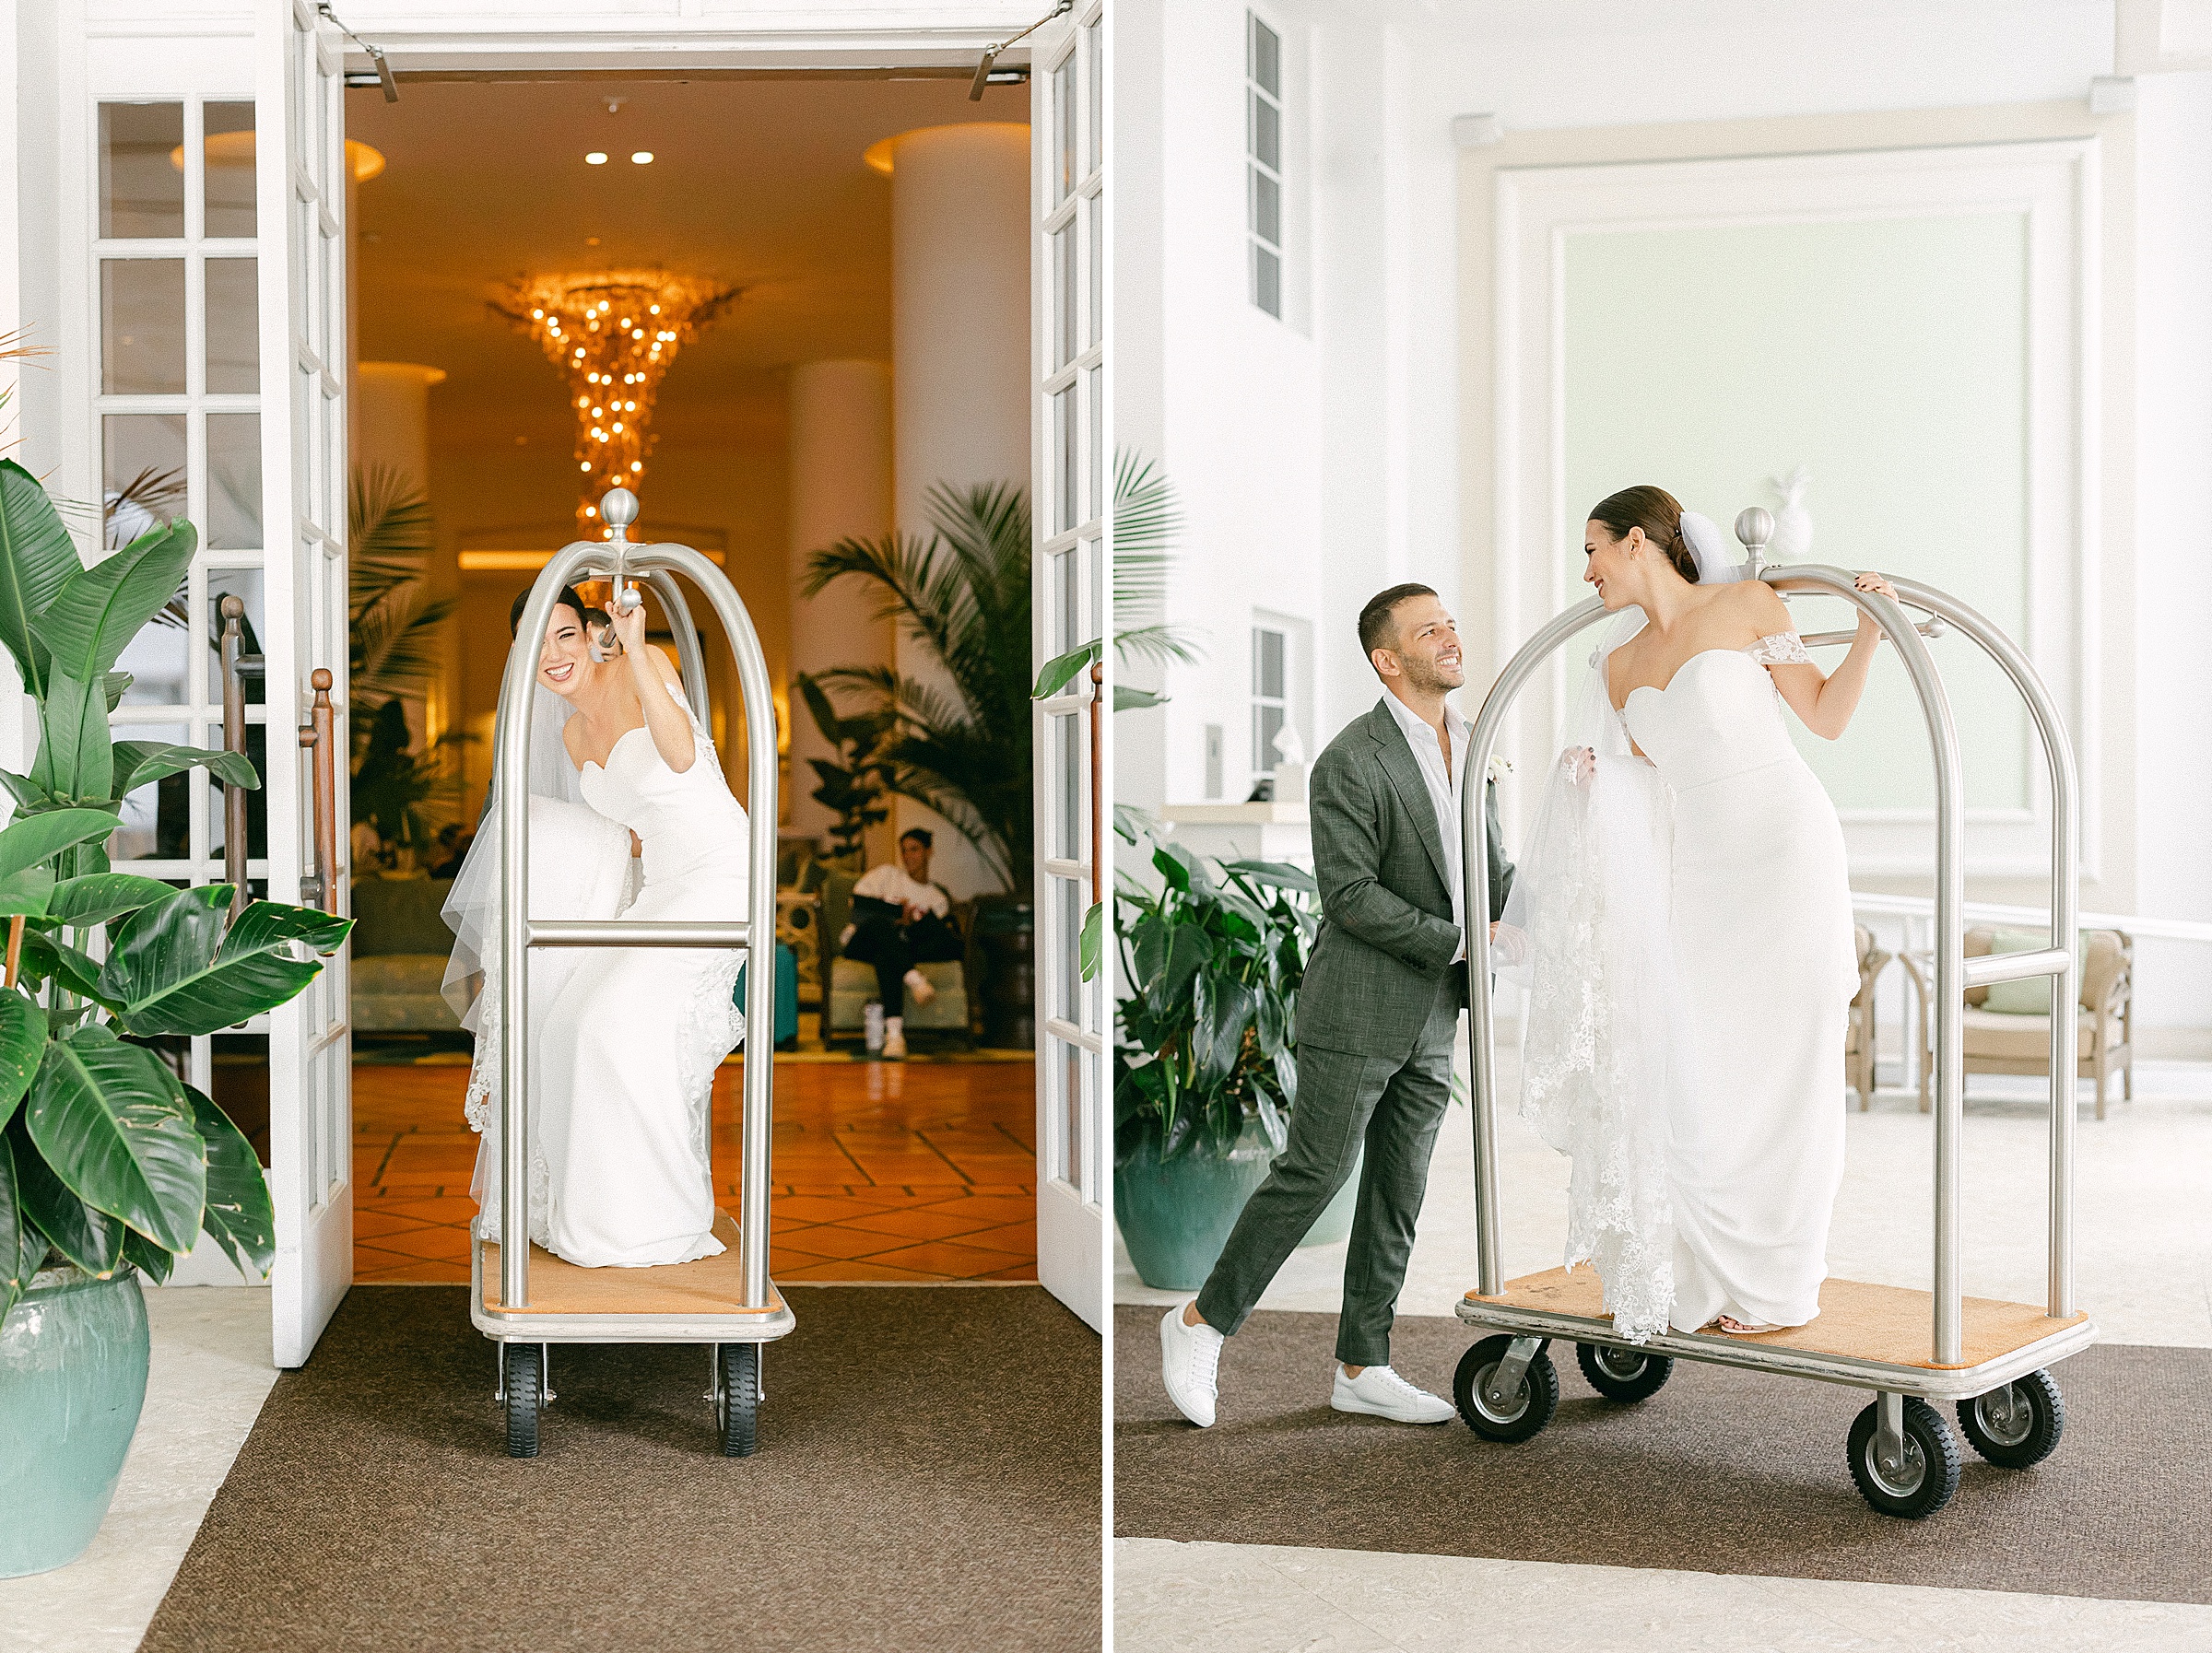 bride riding on the bellhop cart pushed by the groom